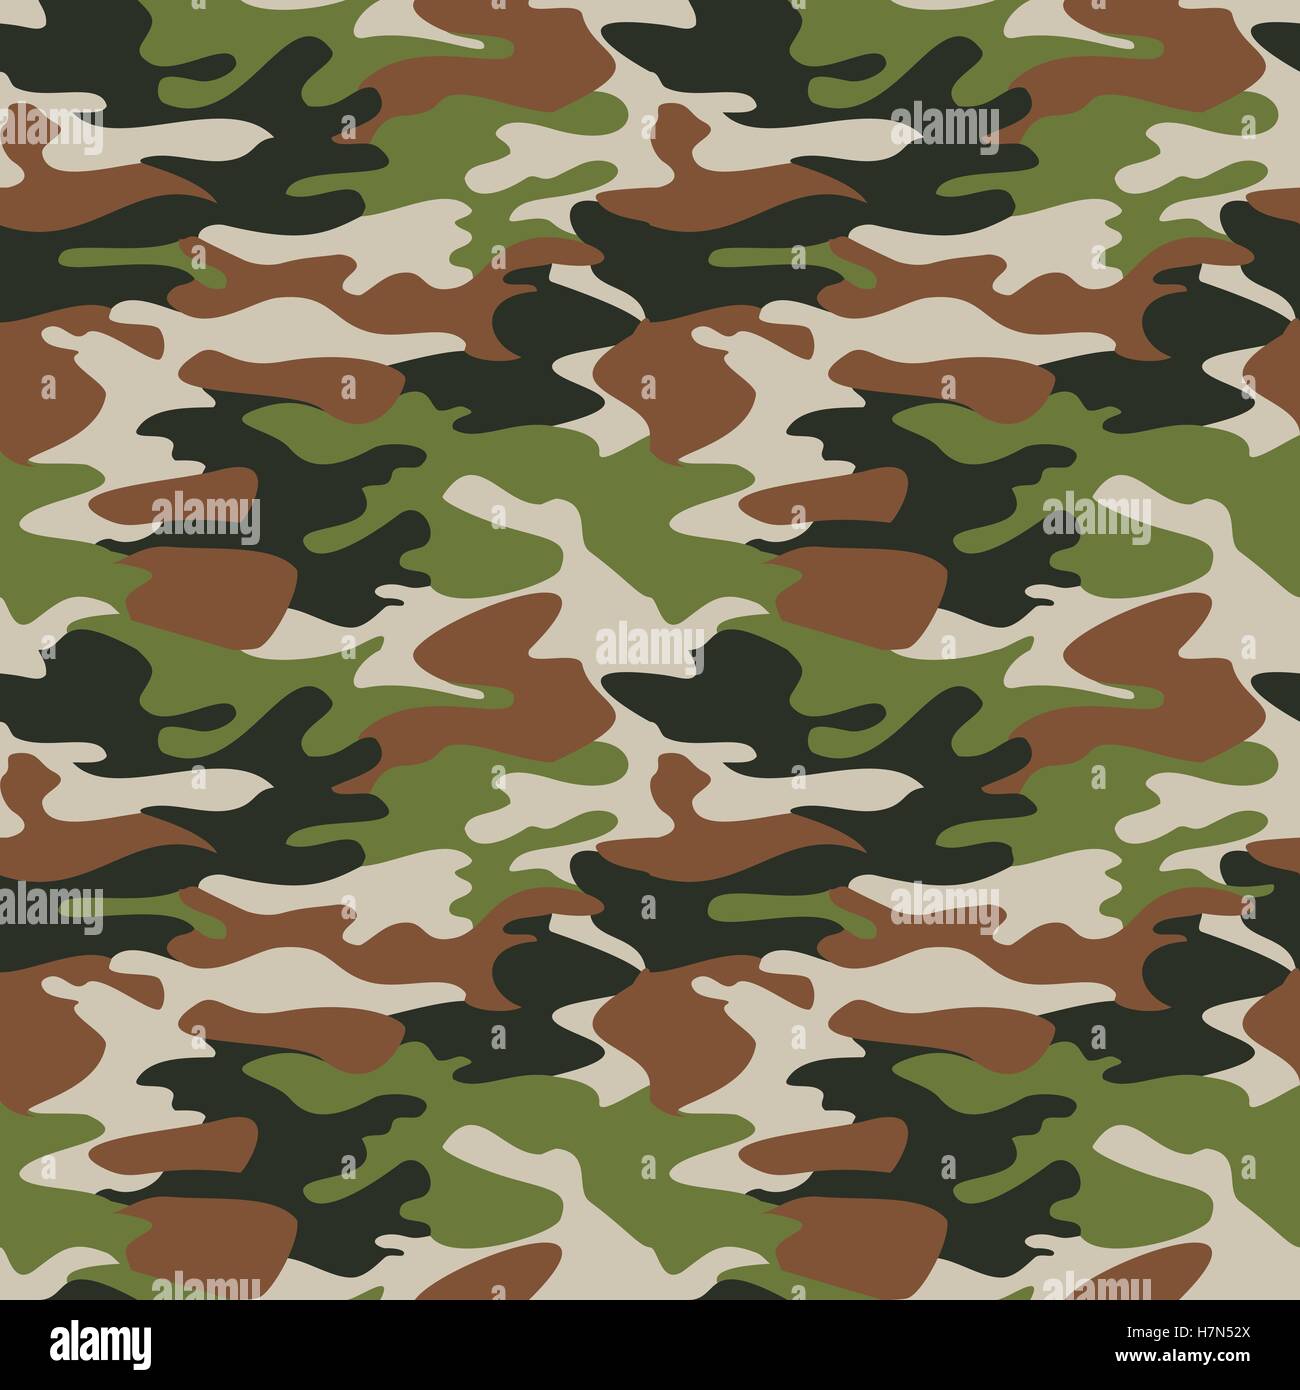 Camouflage pattern background seamless vector. Camo military clothing ...